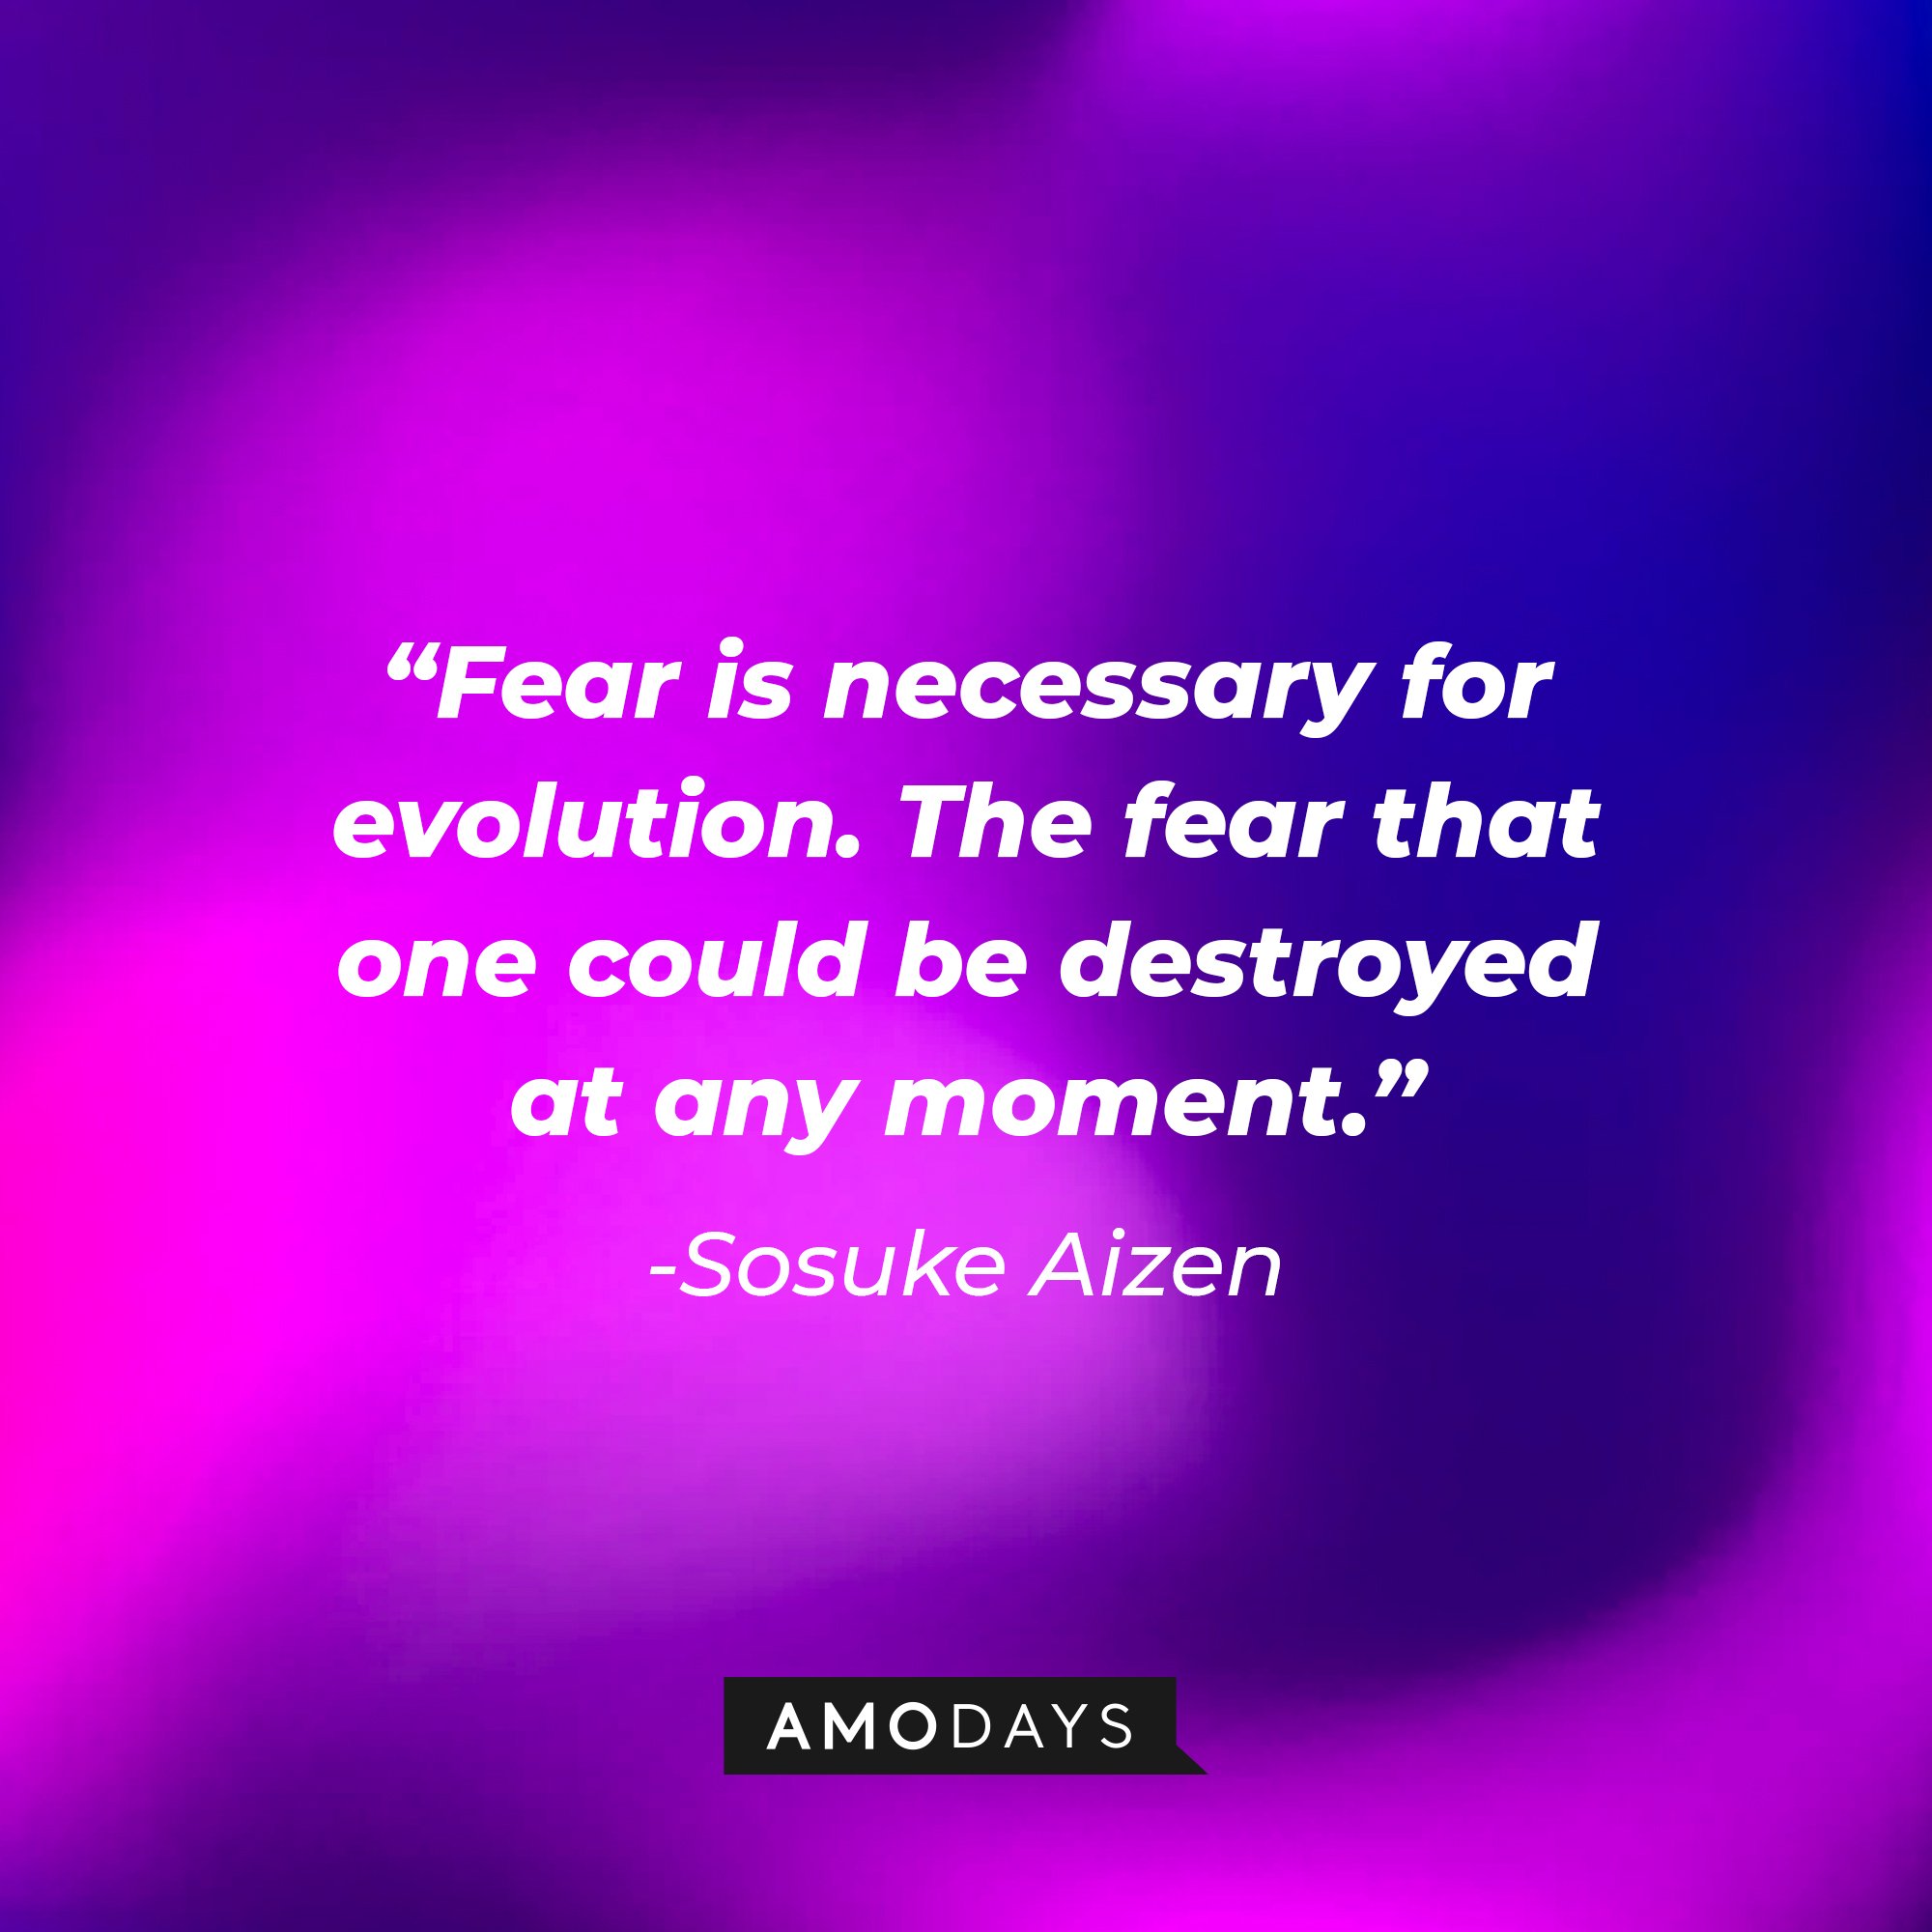 Sosuke Aizen's quote: "Fear is necessary for evolution. The fear that one could be destroyed at any moment." | Image: AmoDays